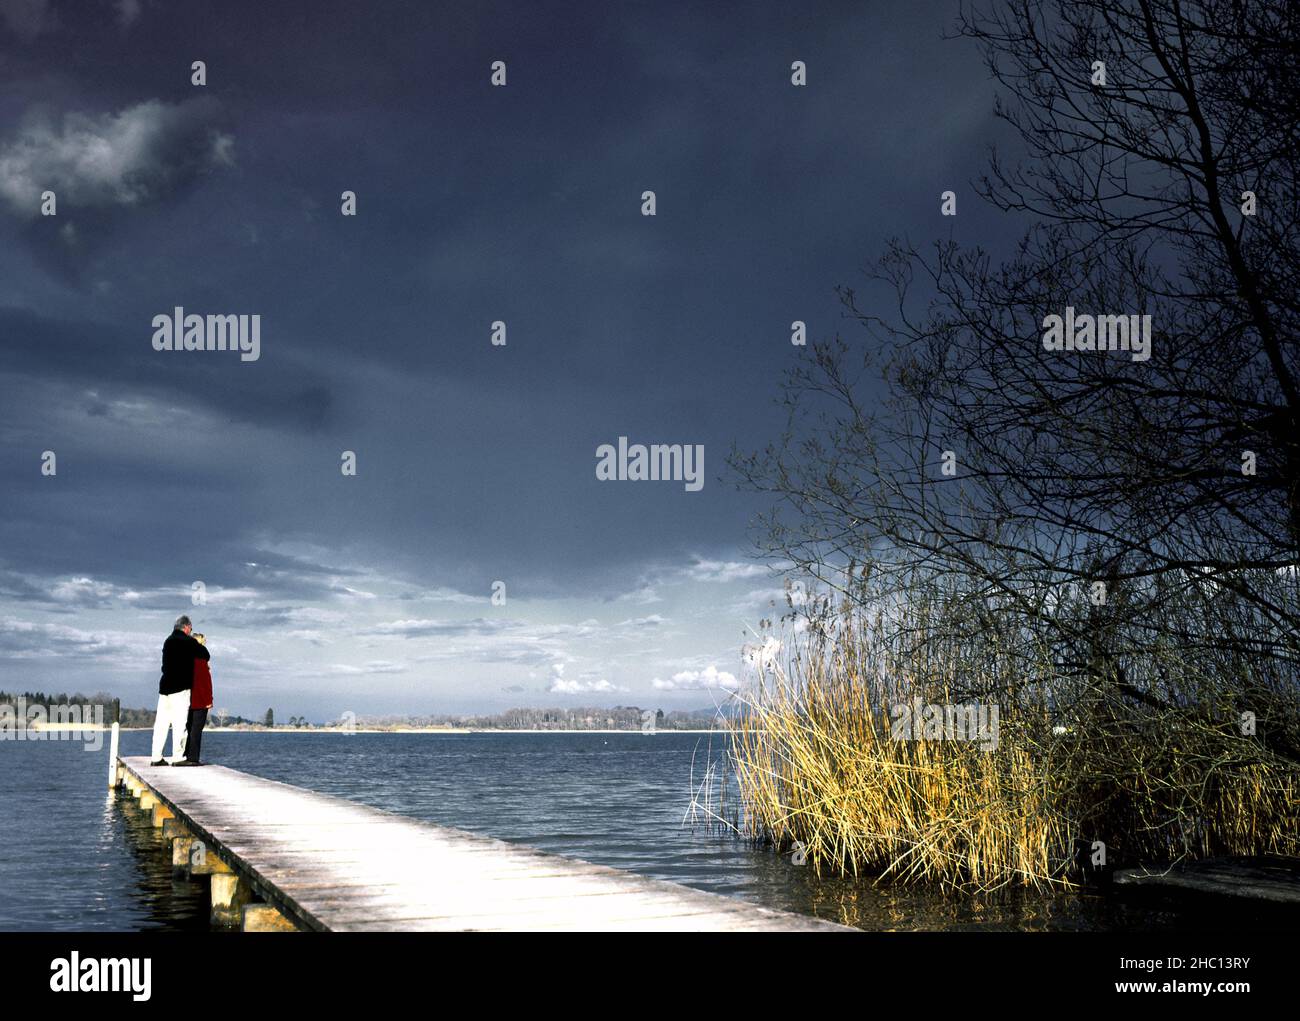 Man & Woman standing  on a small short wood  pier, jetty, Chiemsee, Bavaria,  Germany Stock Photo